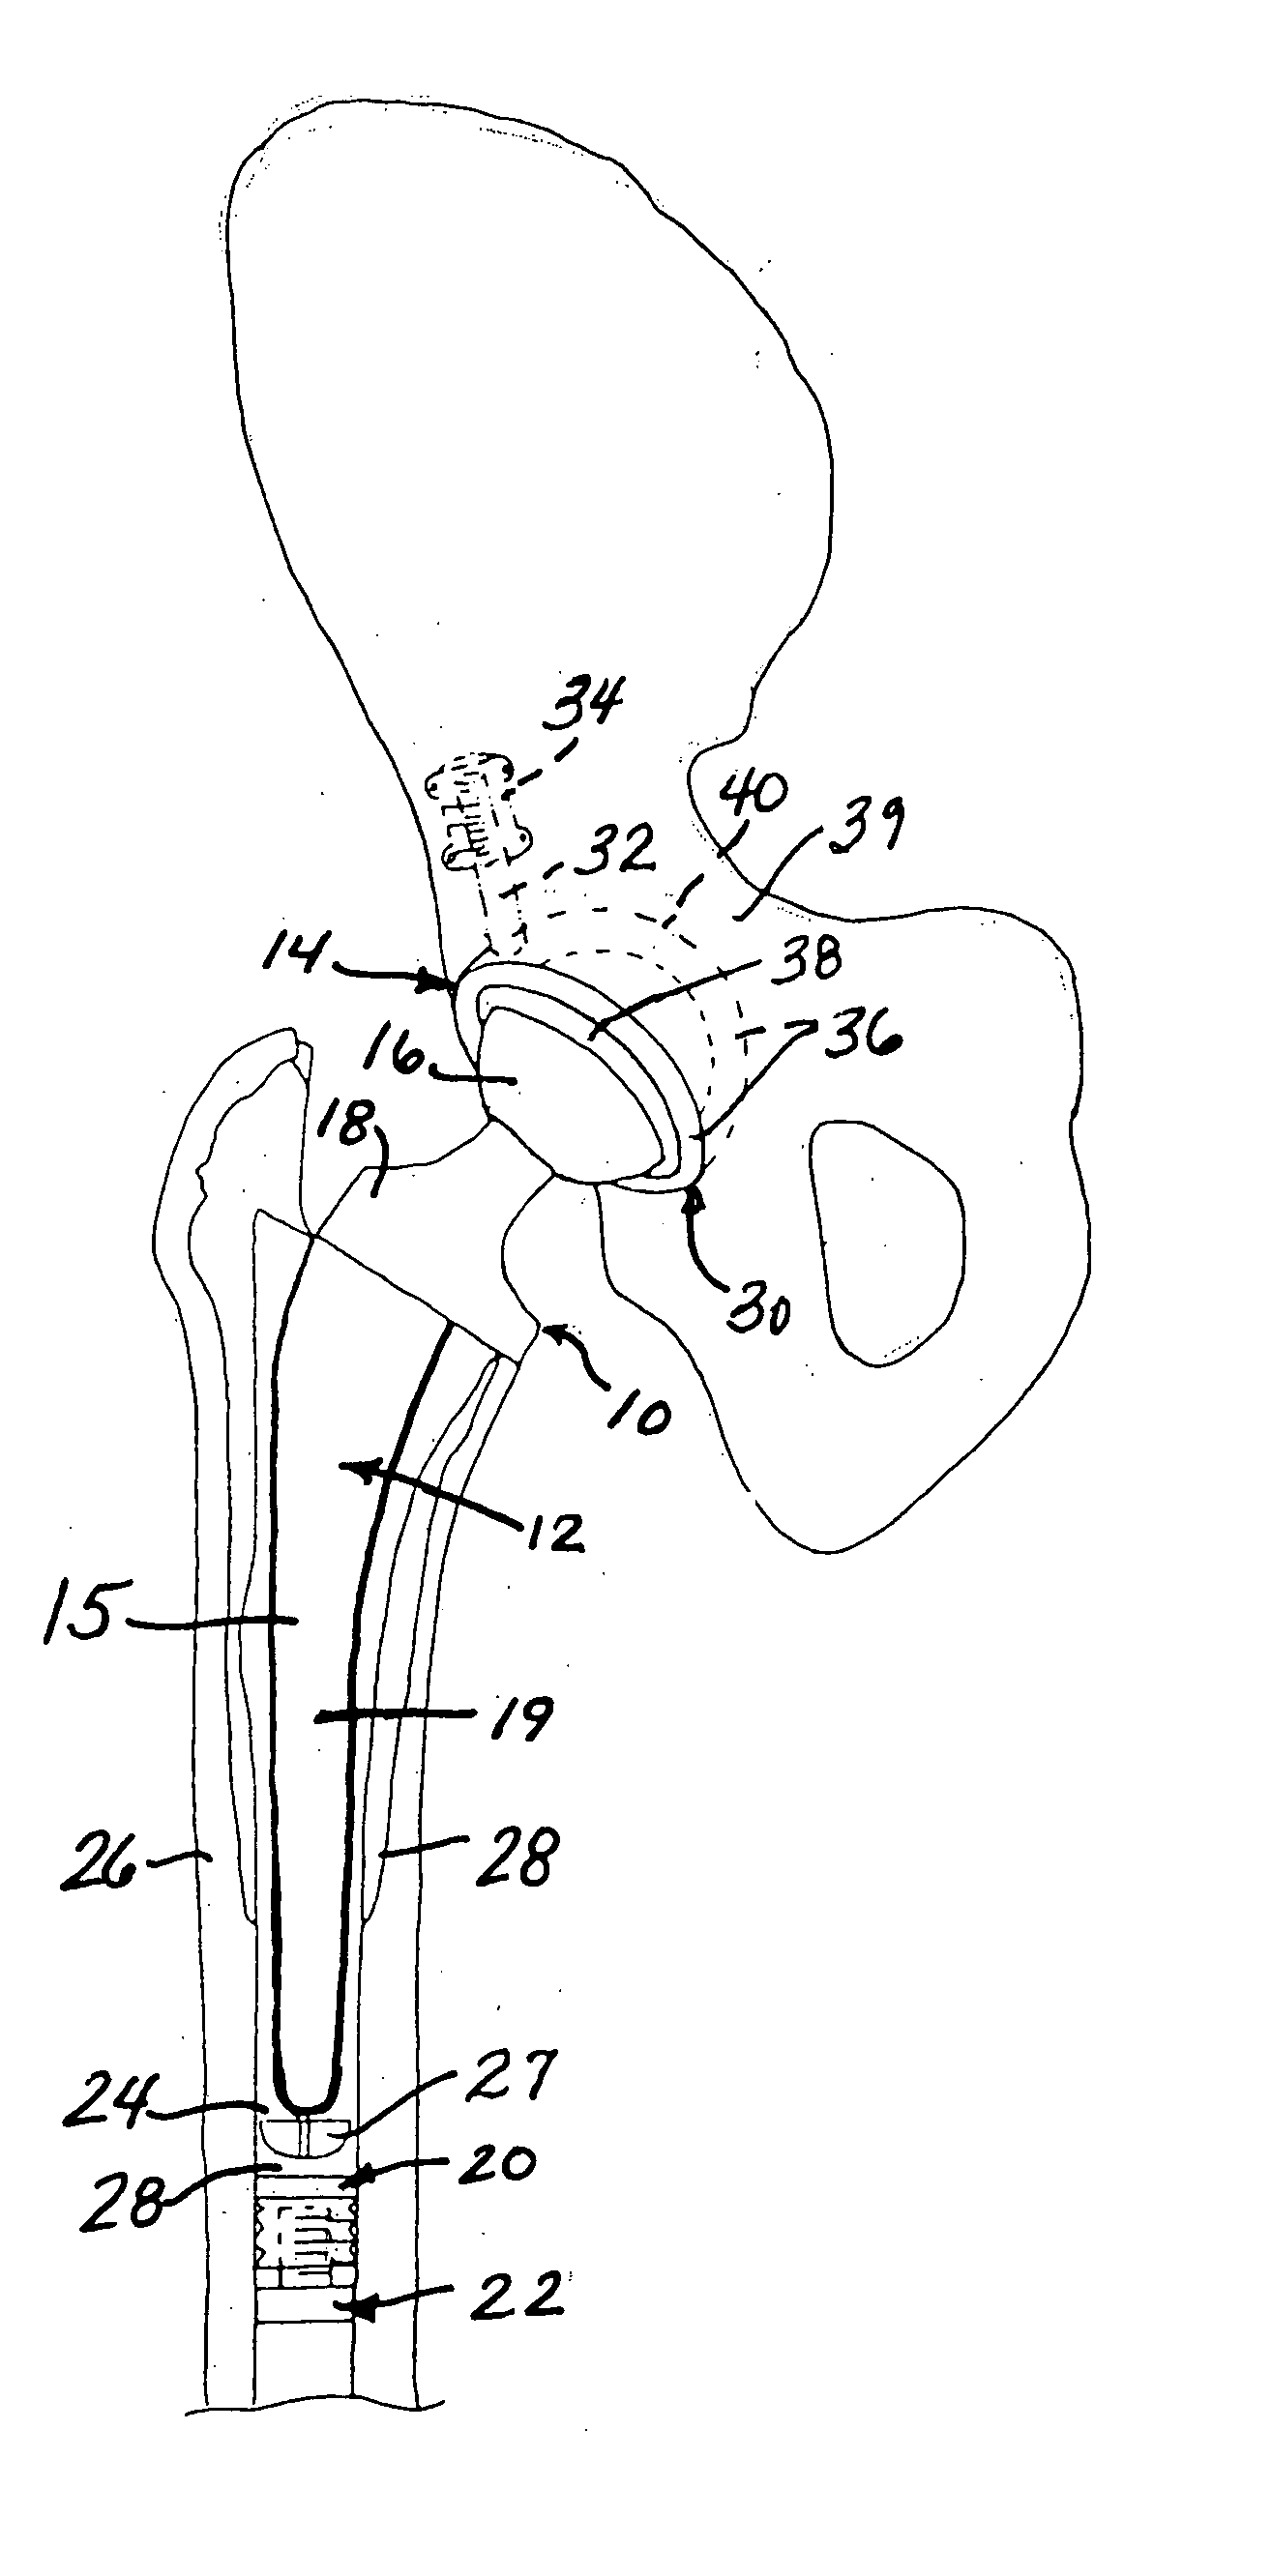 Implant system with migration measurement capacity